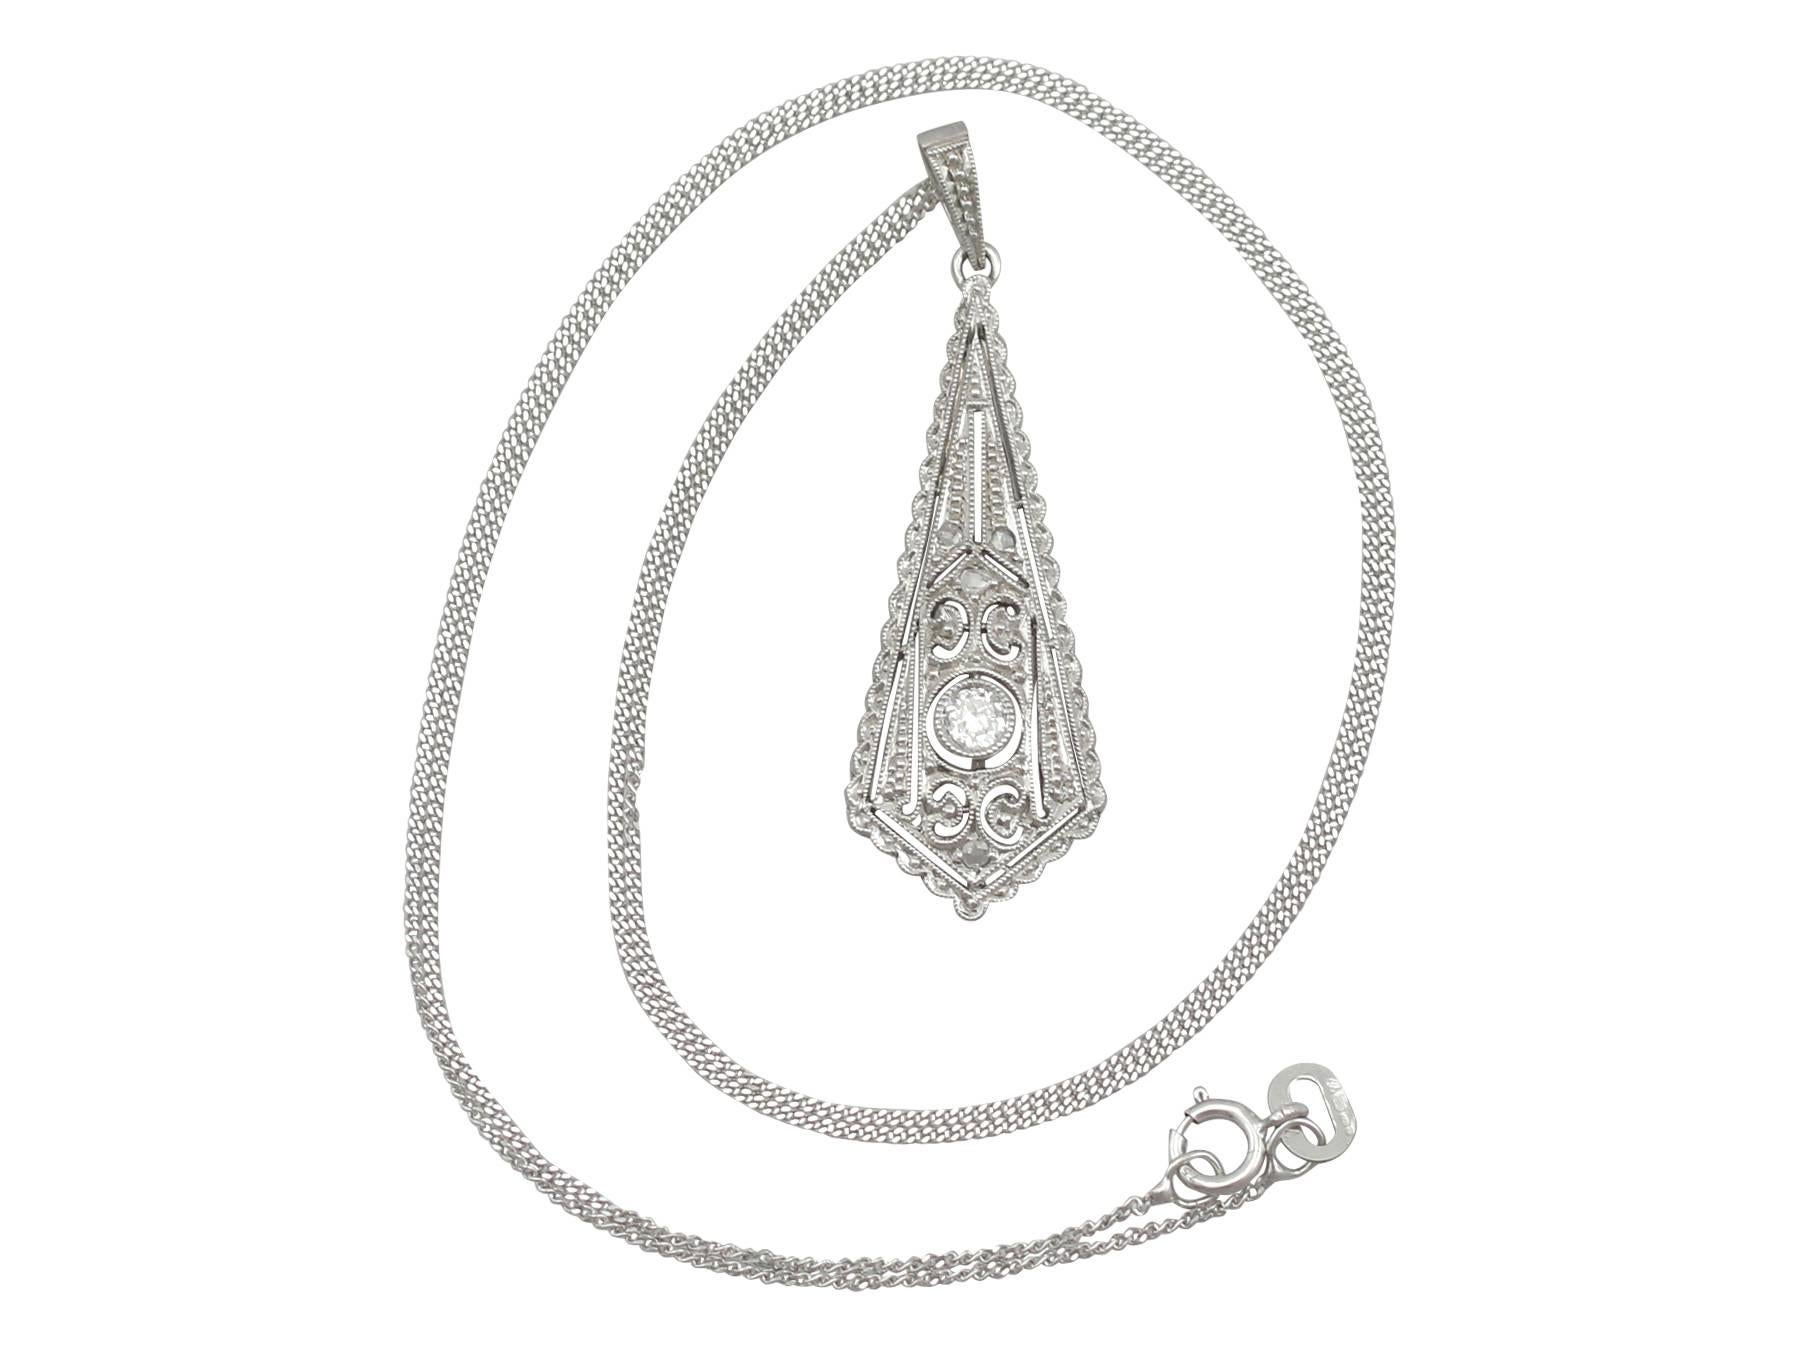 A fine and impressive antique 0.13 carat diamond and 14 karat white gold Art Deco pendant; part of our diverse antique diamond jewelry collections

This fine and impressive antique diamond drop pendant has been crafted in 14k white gold.

The